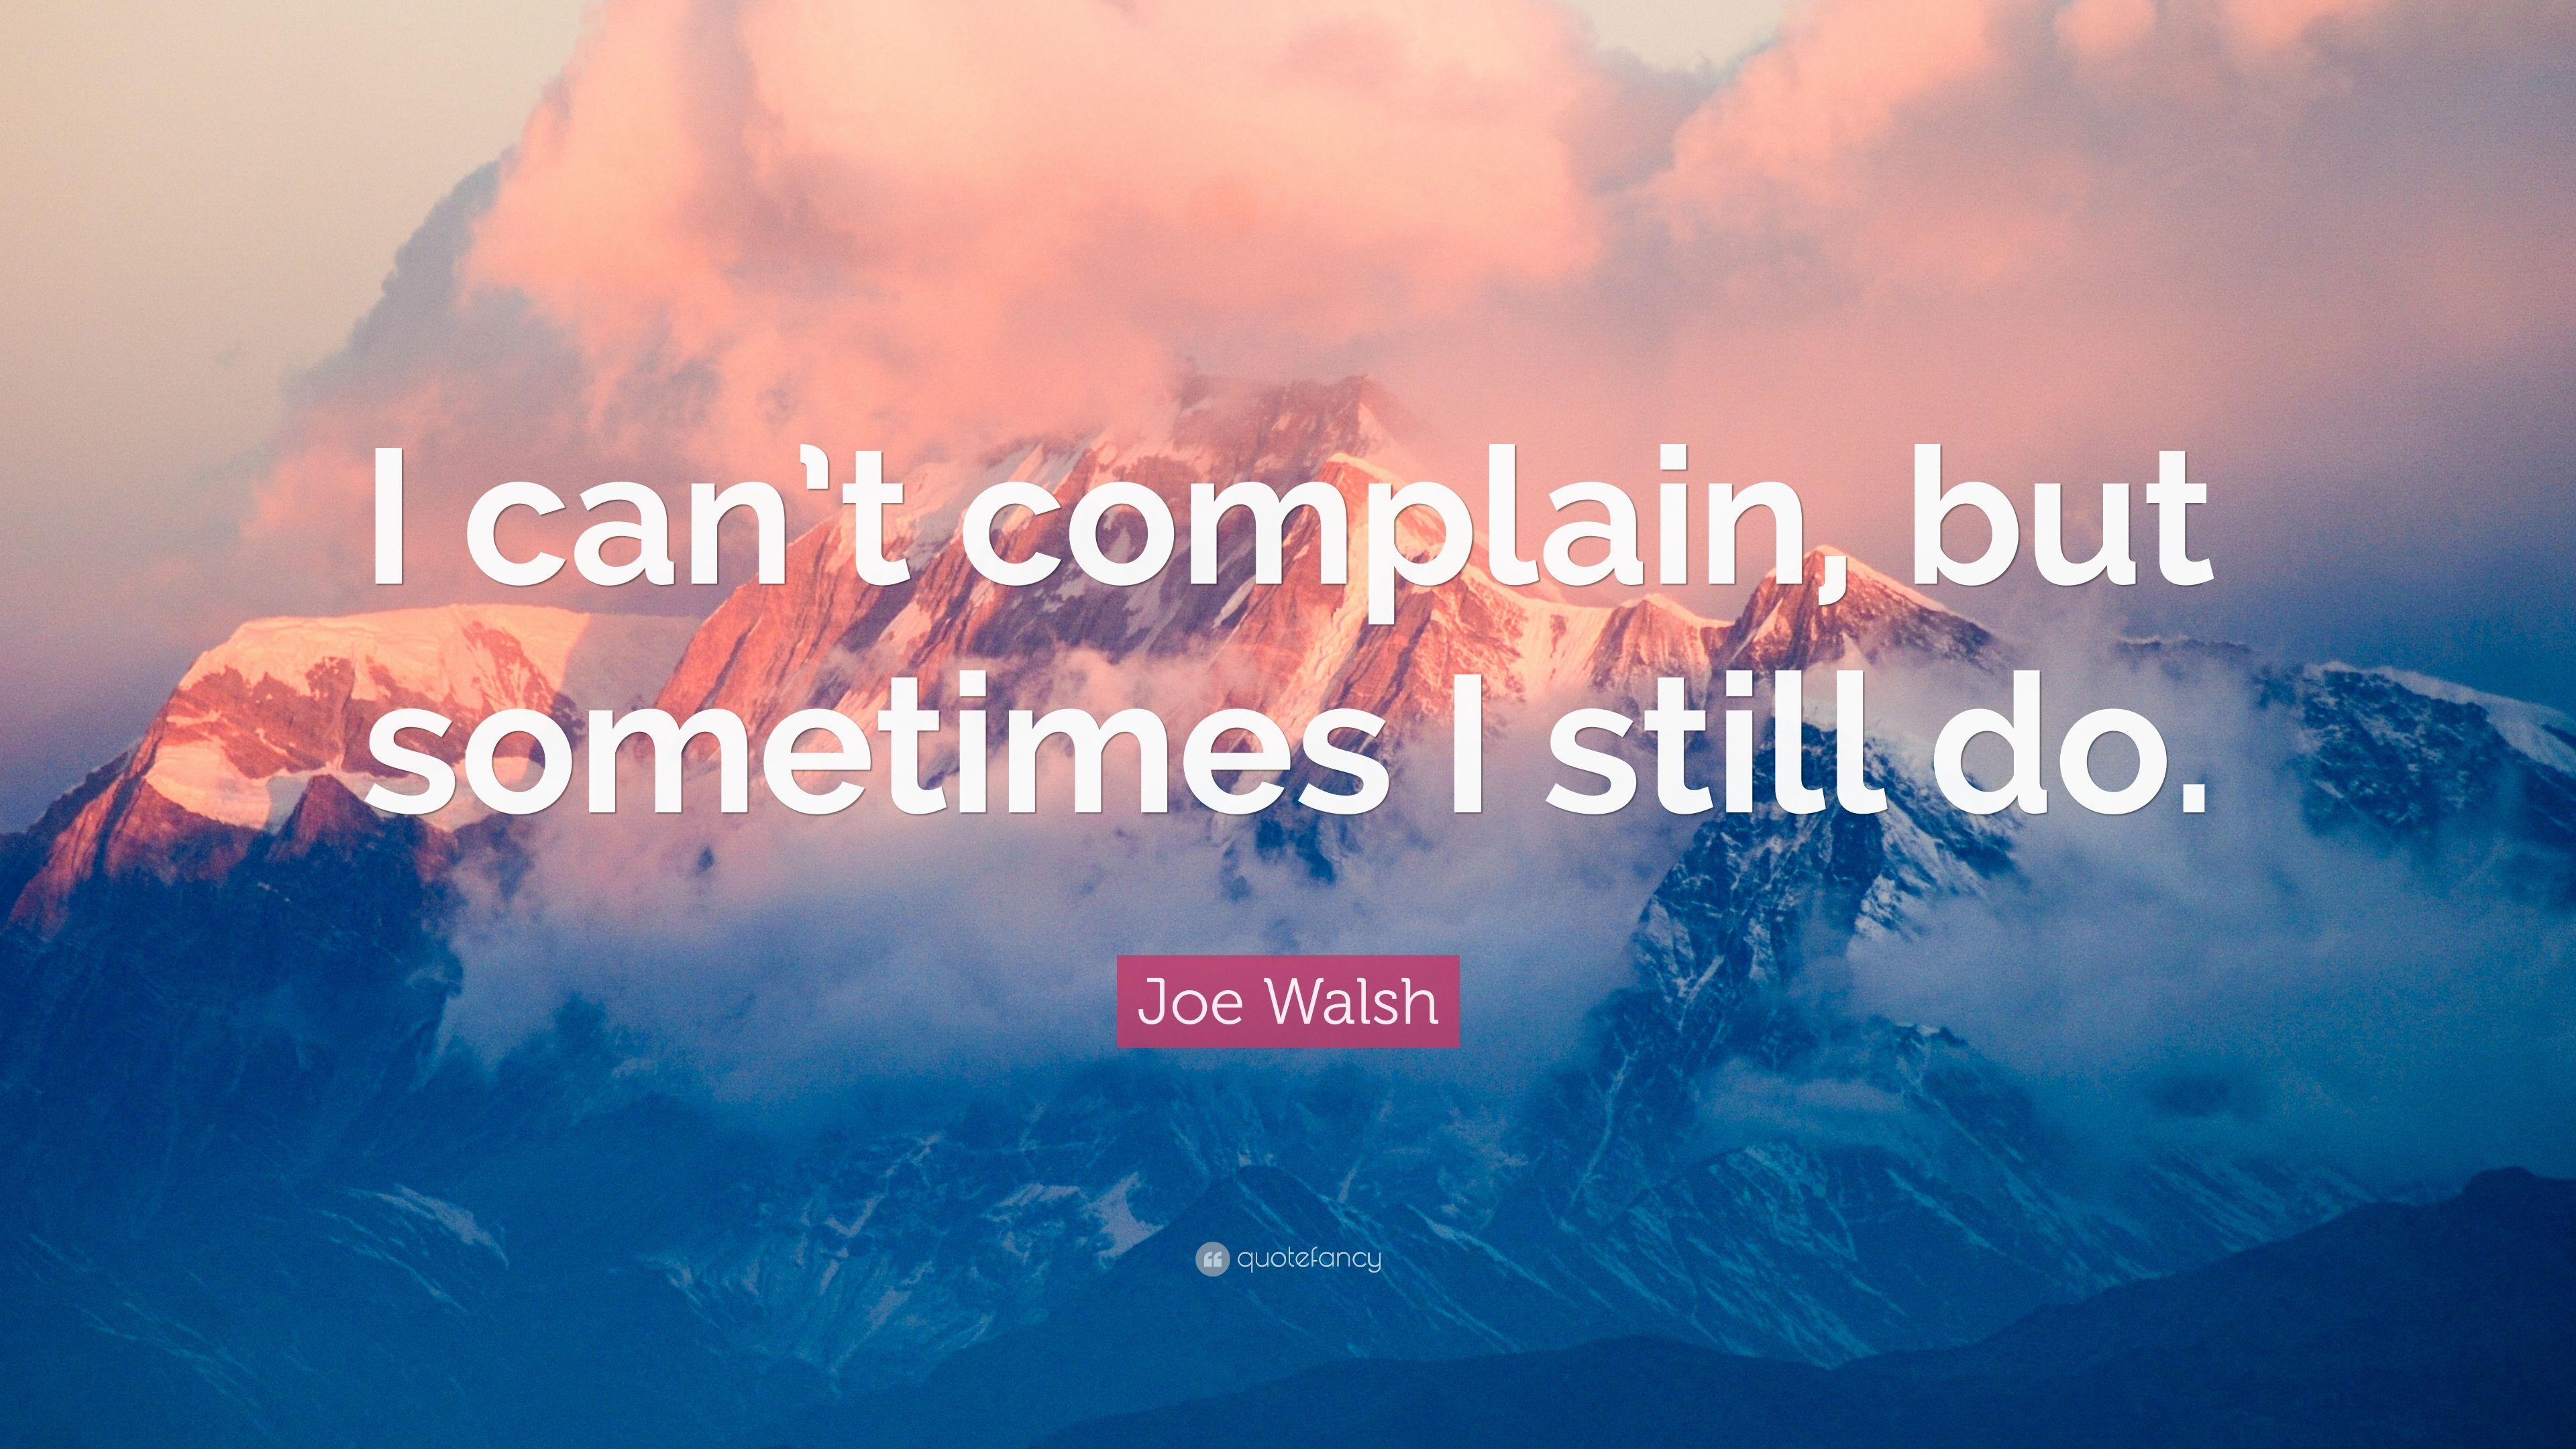 Joe Walsh Quote: “I can't complain, but sometimes I still do.” 7